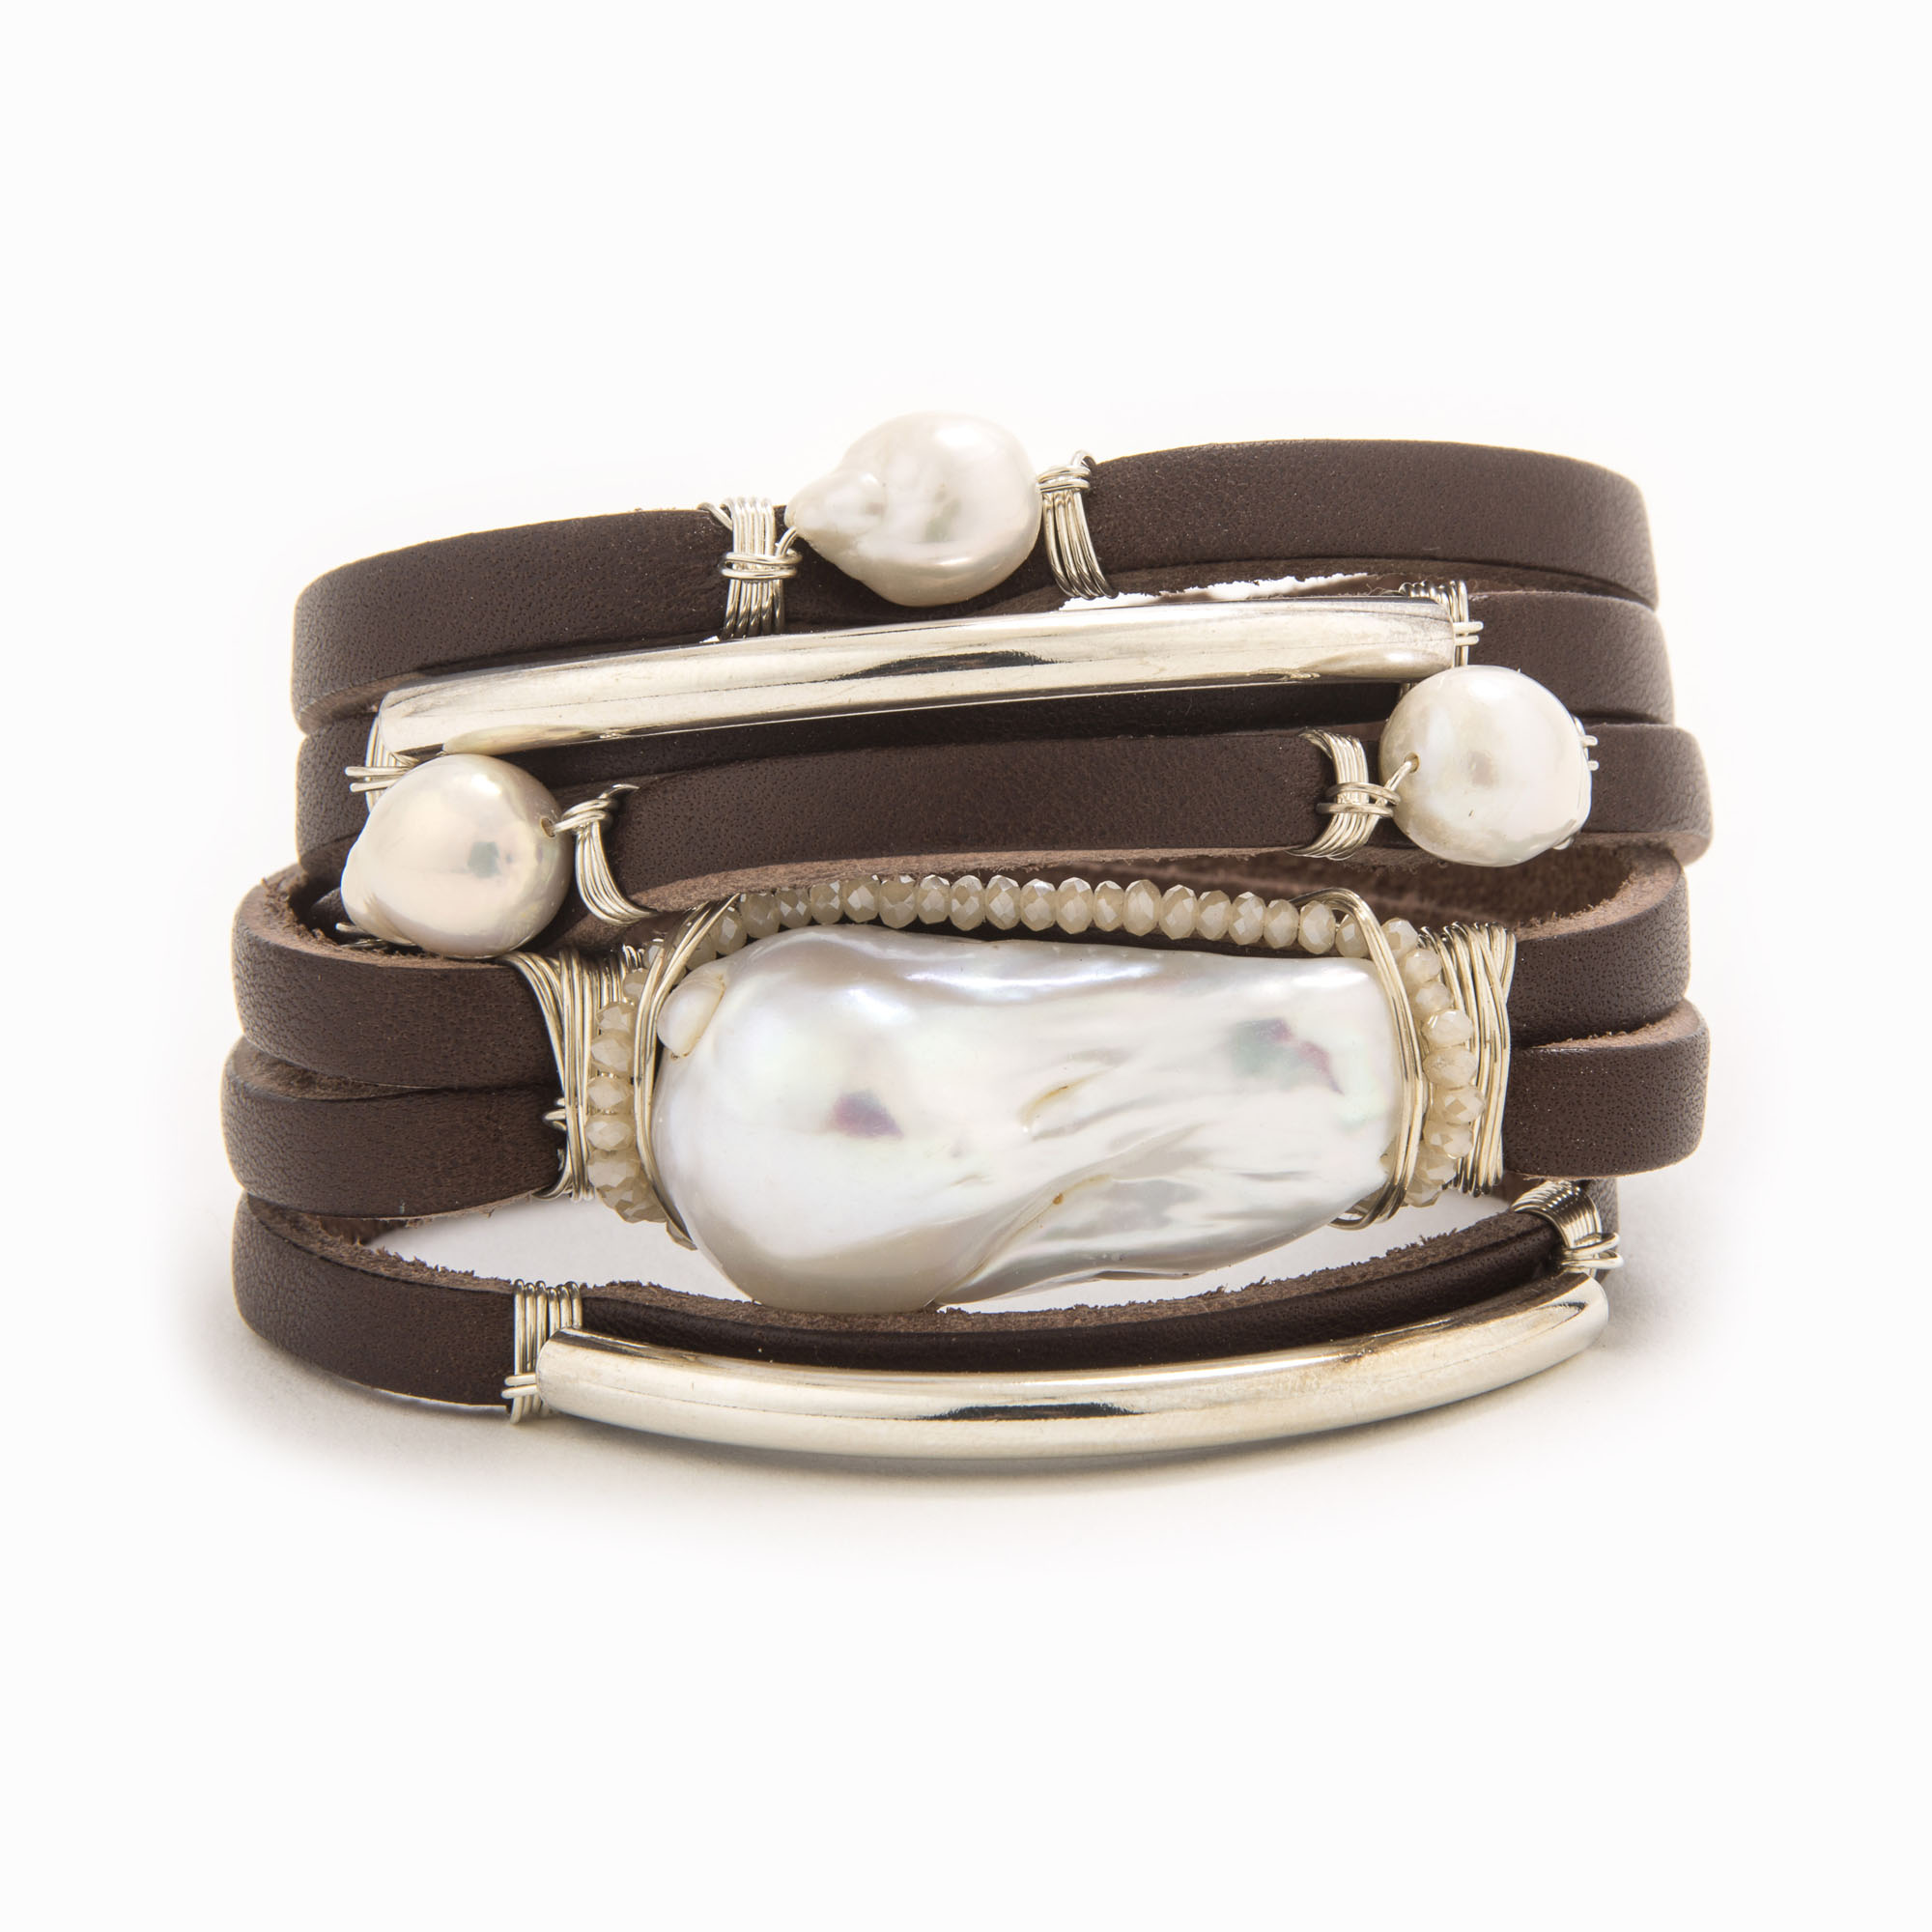 Featured image for “Helena Wrap Bracelet”